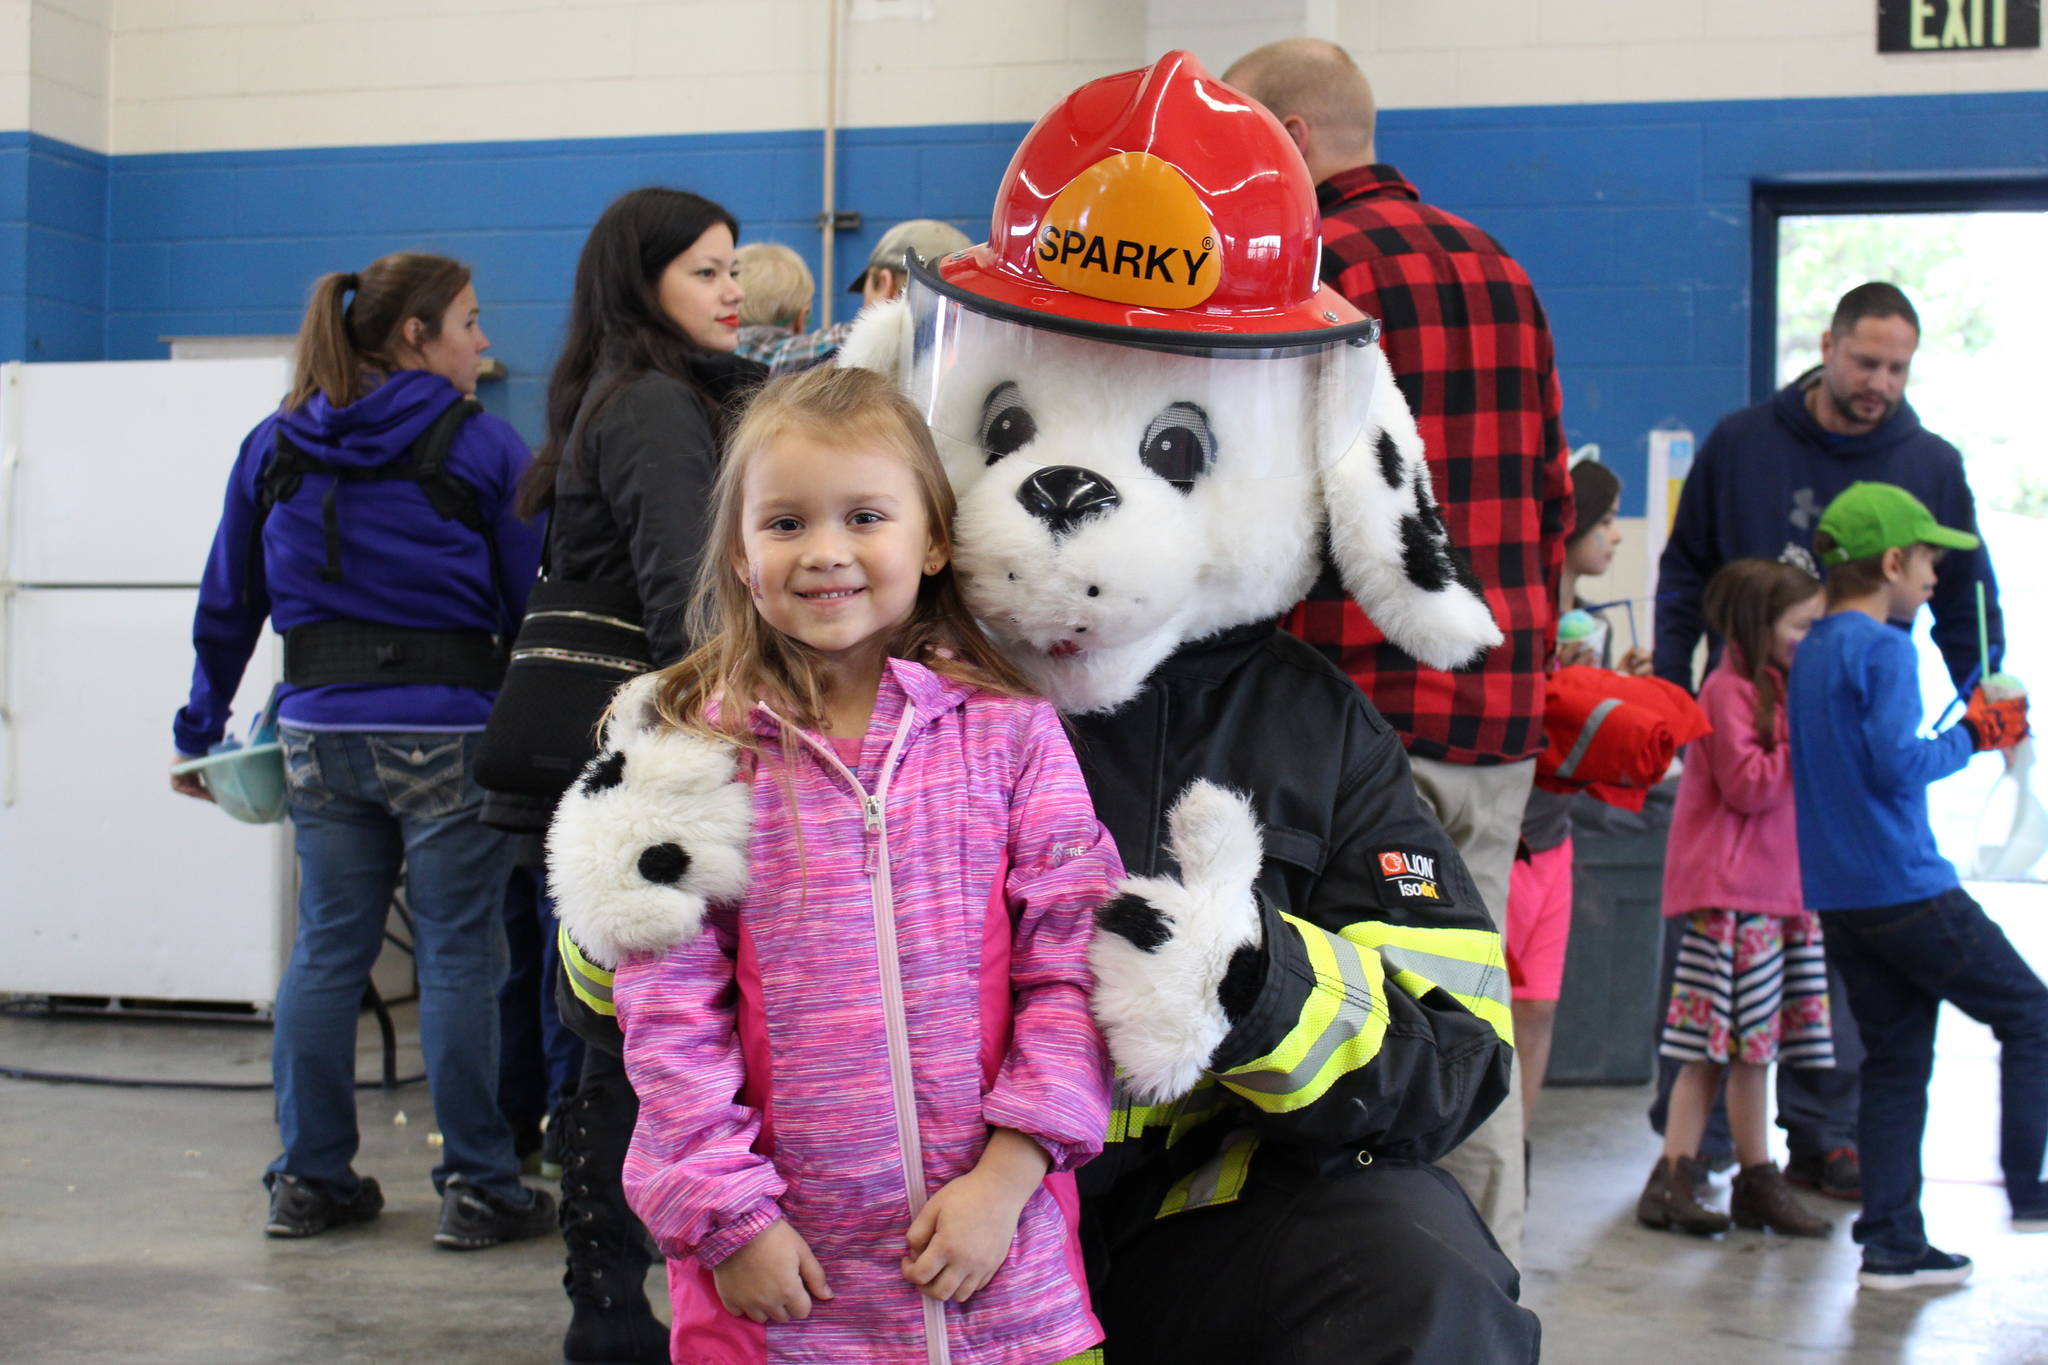 Journie Hoskins-Brendible poses with Sparky the Fire Dog during the Central Emergency Services Open House at Fire Station 1 in Soldotna, Alaska on Sept. 28, 2019. (Photo by Brian Mazurek/Peninsula Clarion)